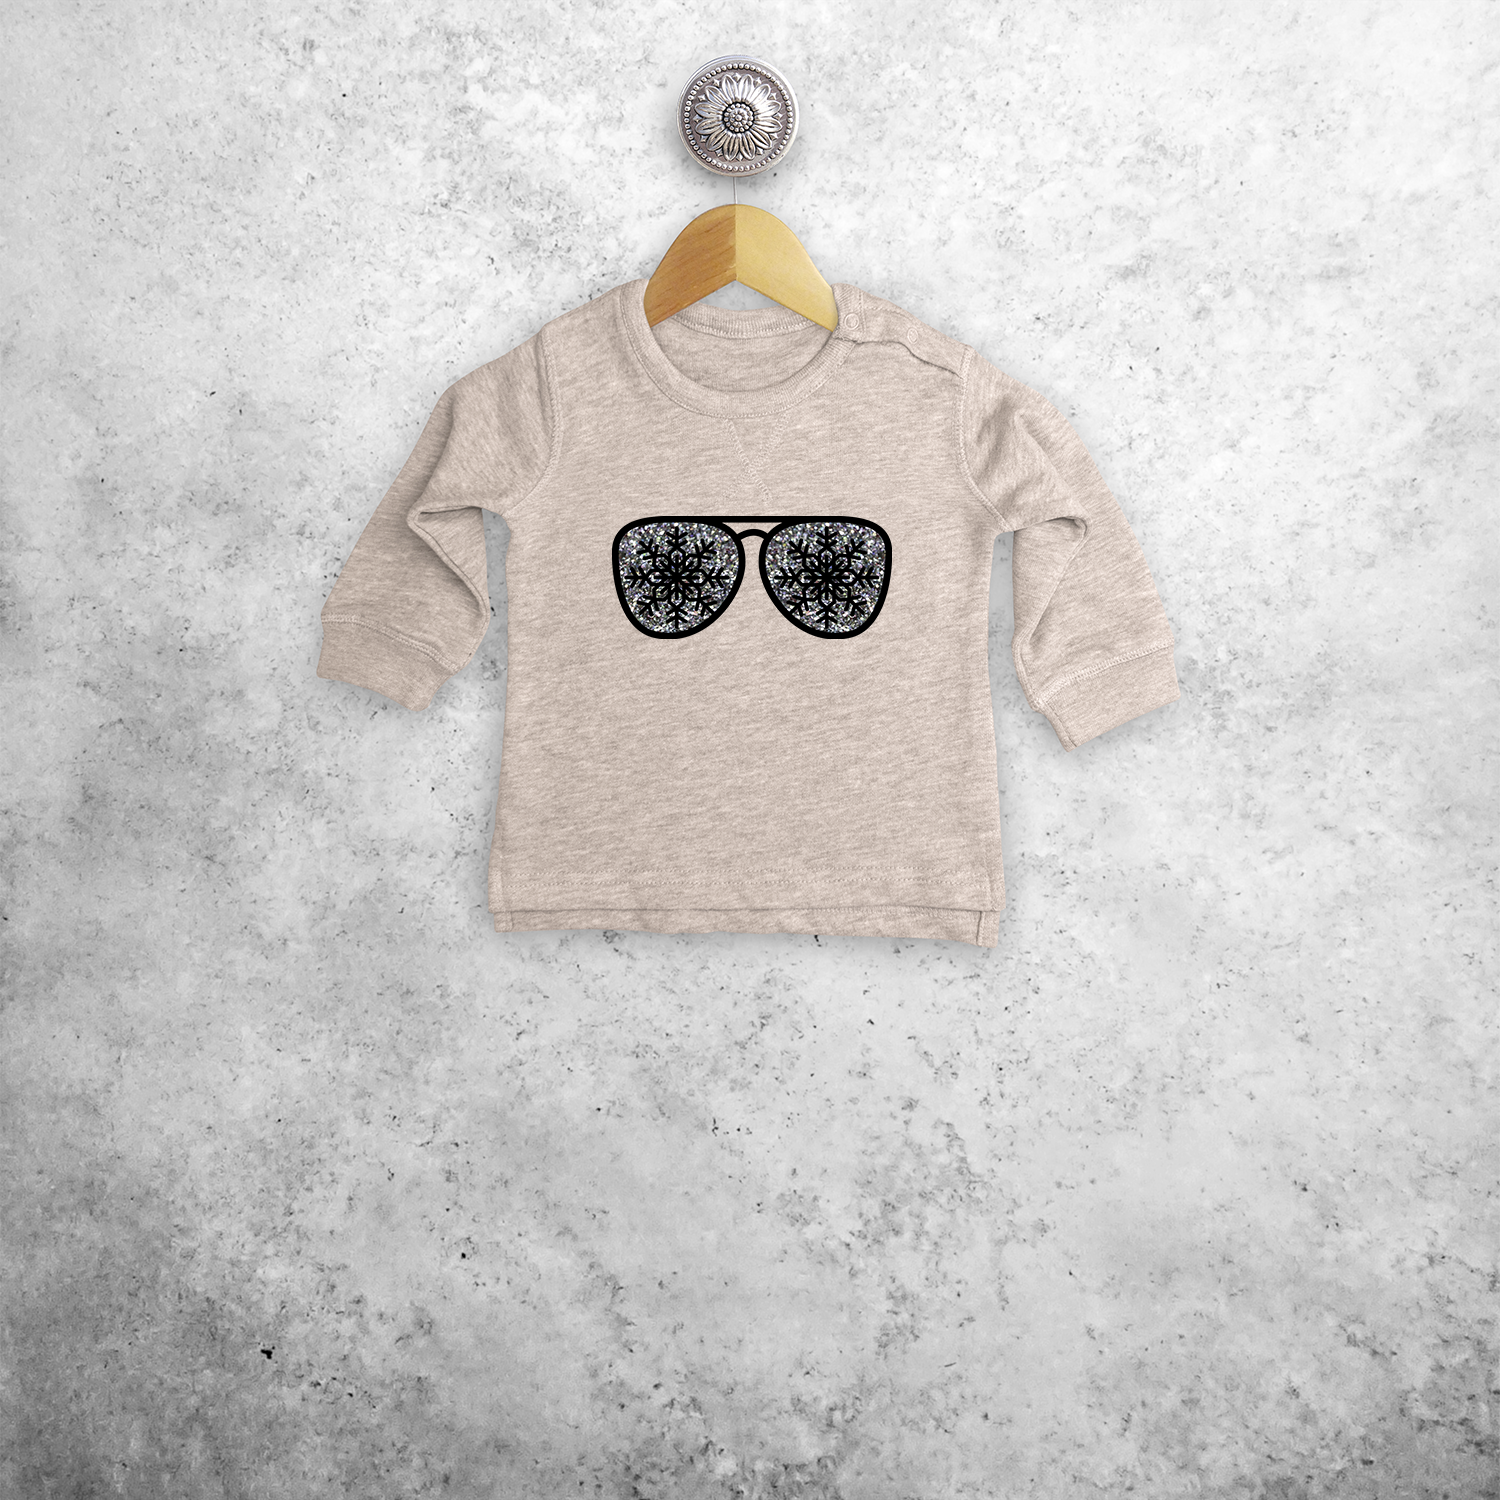 Baby or toddler sweater, with glitter snow star glasses print by KMLeon.